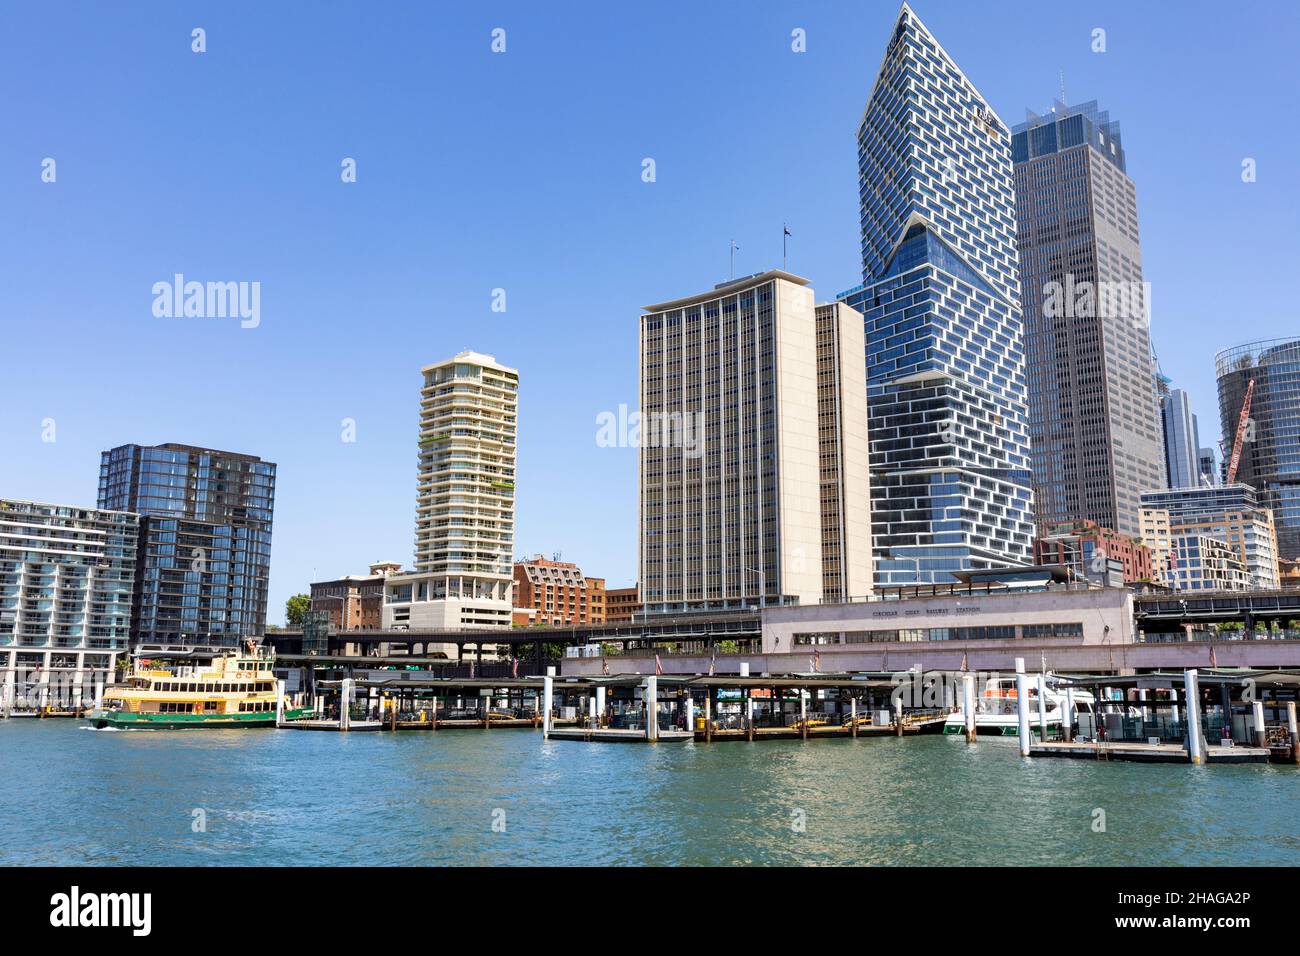 Sydney city centre architecture and skyscrapers cityscape buildings at Circular Quay,Sydney,Australia Stock Photo